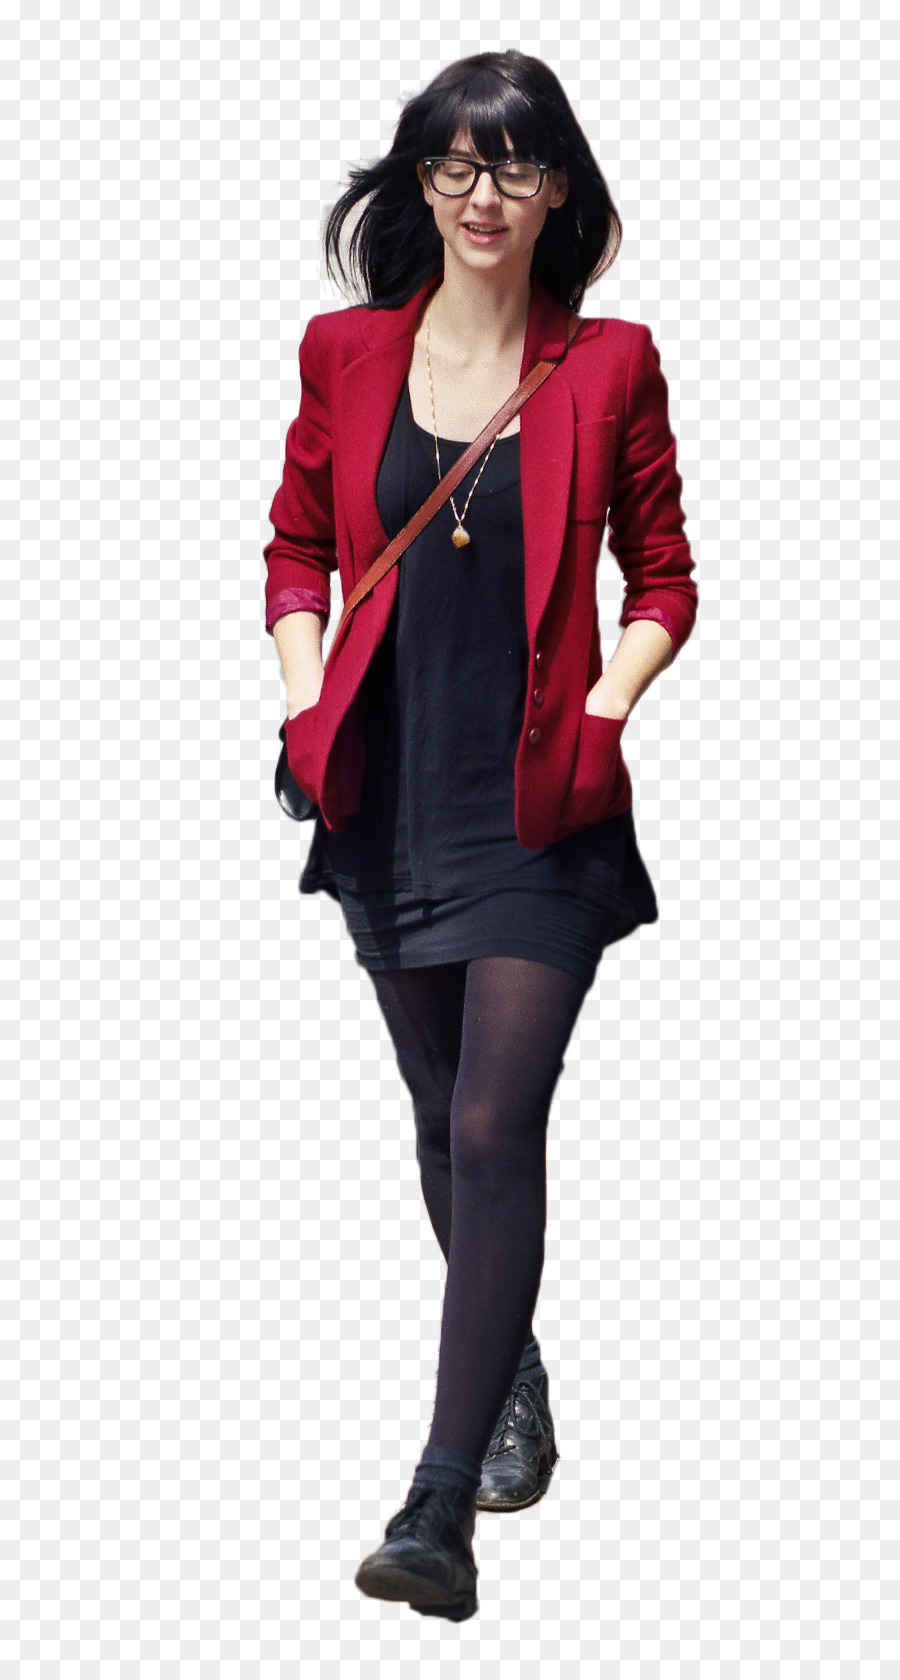 Woman Walking - Woman'.s Day png download - 617*1680 - Free Transparent  png Download.